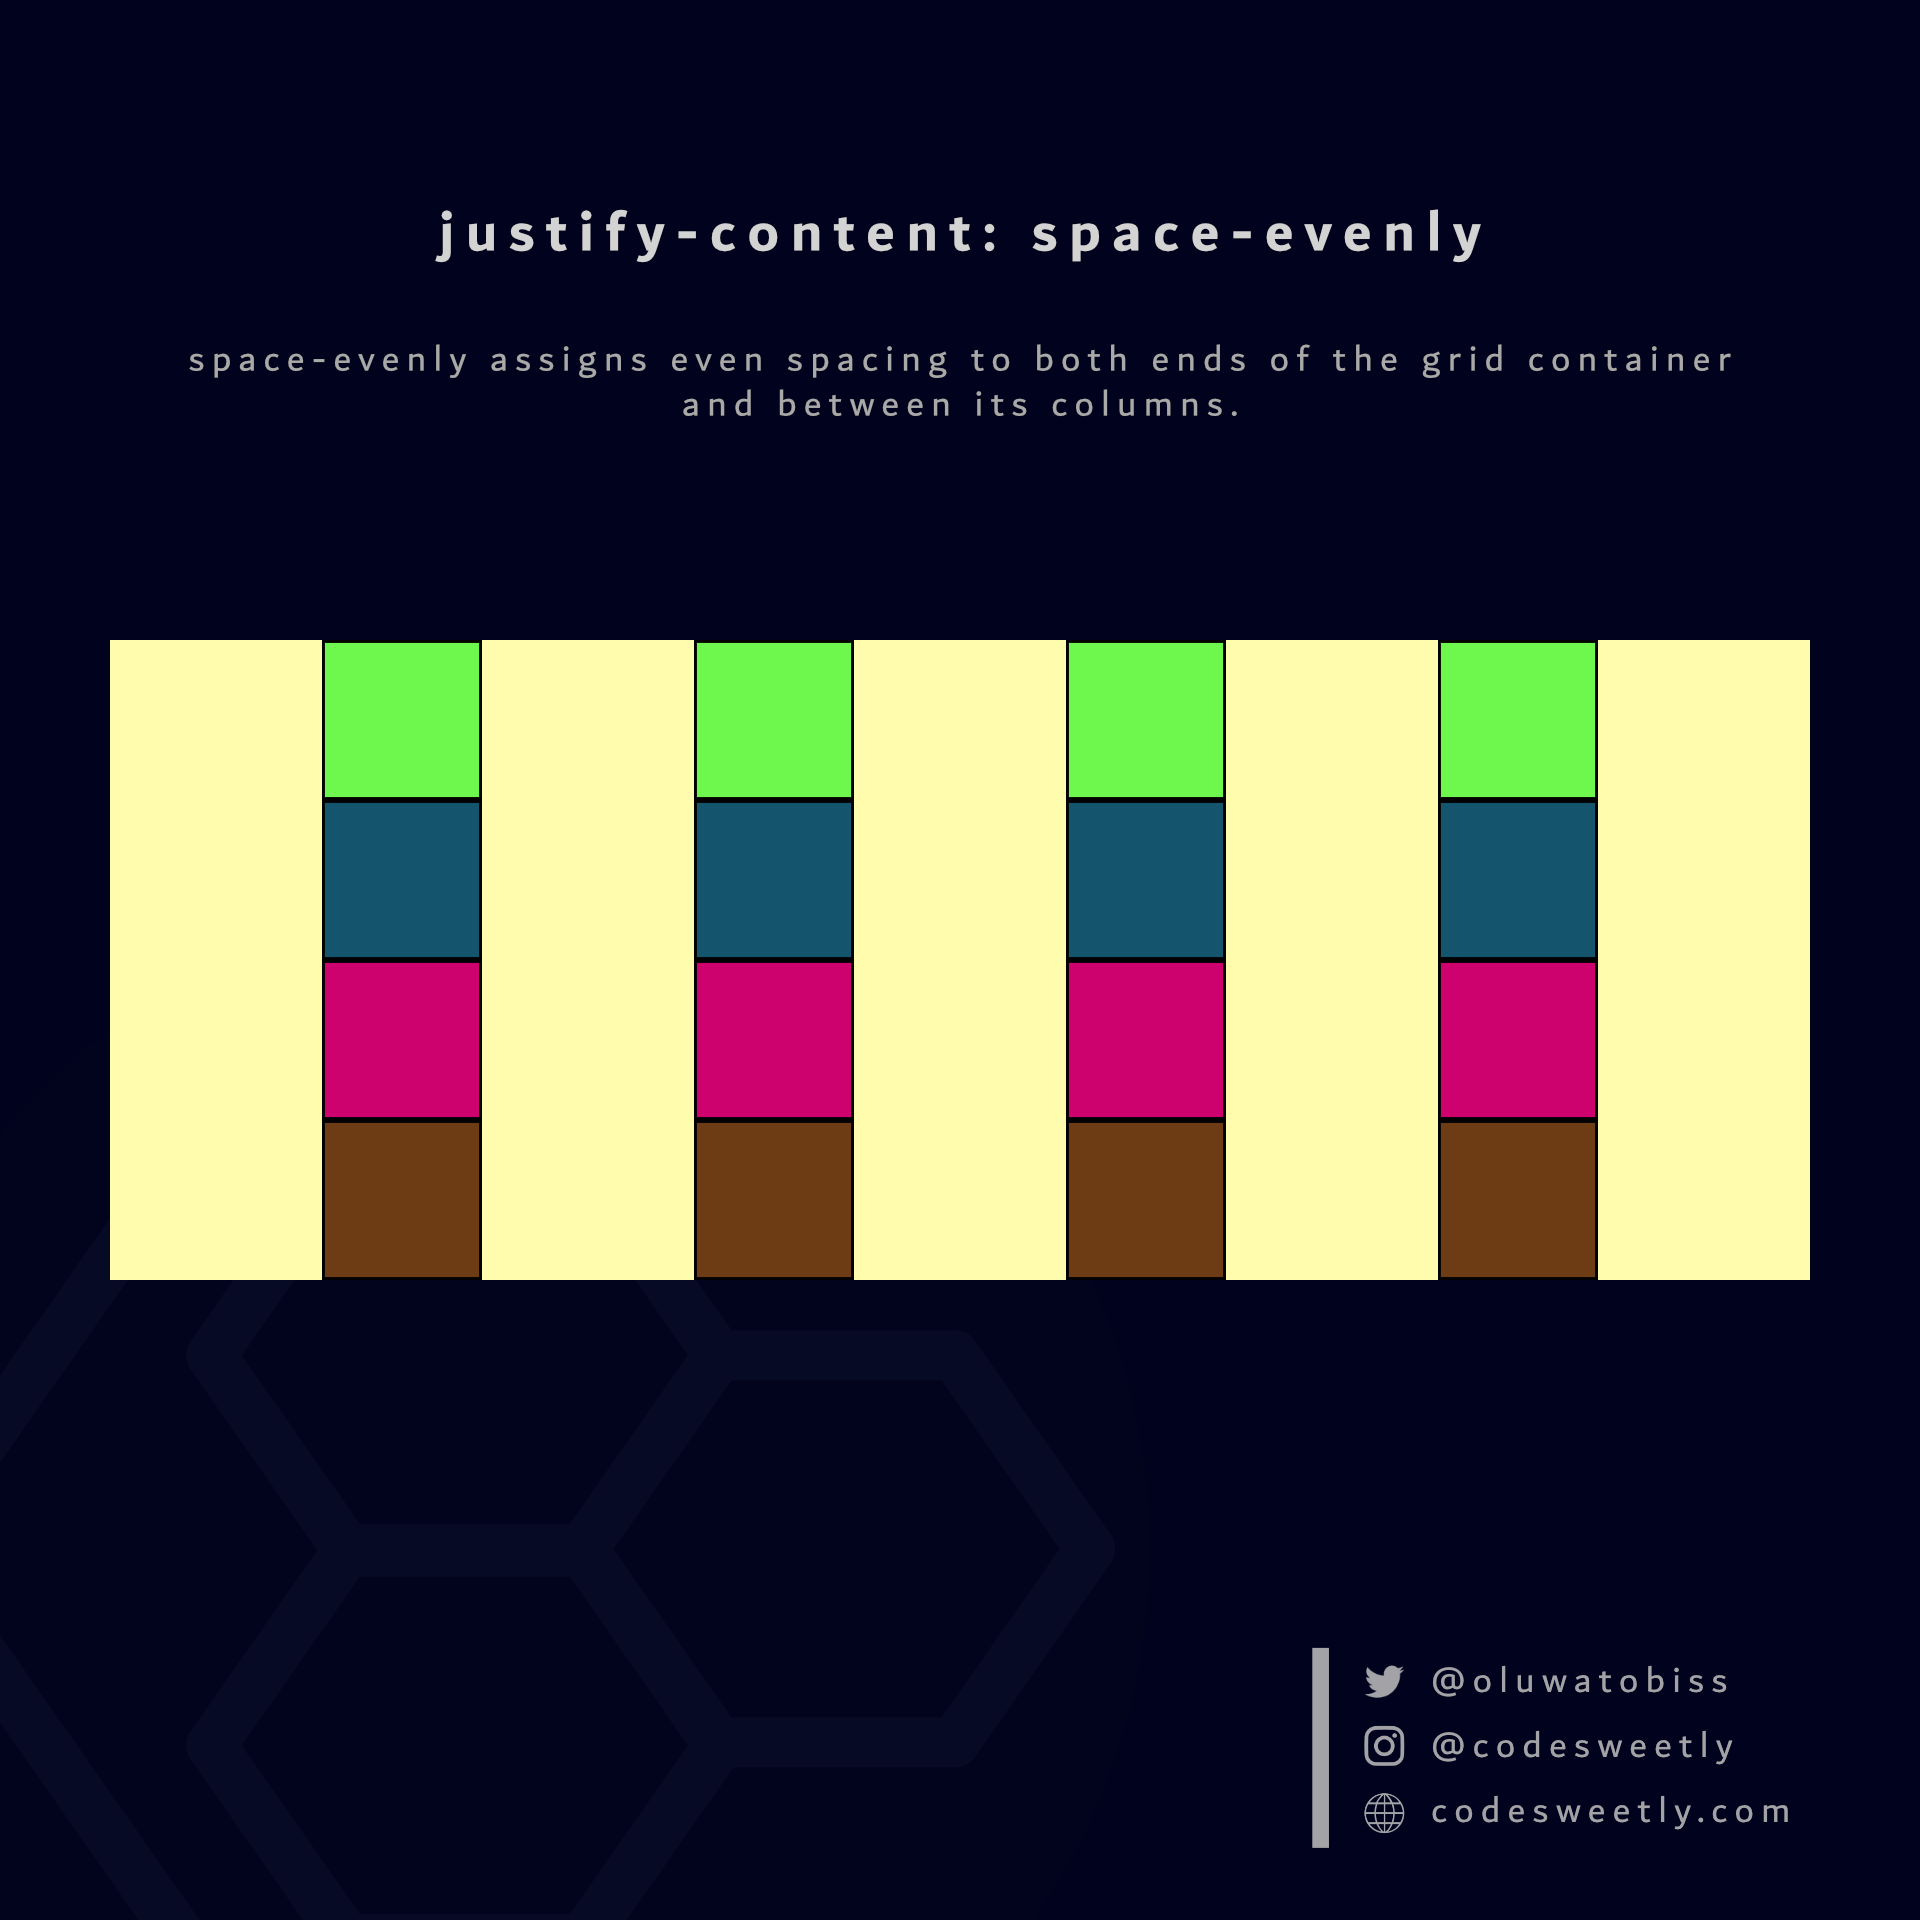 Illustration of justify-content's space-evenly value in CSS Grid